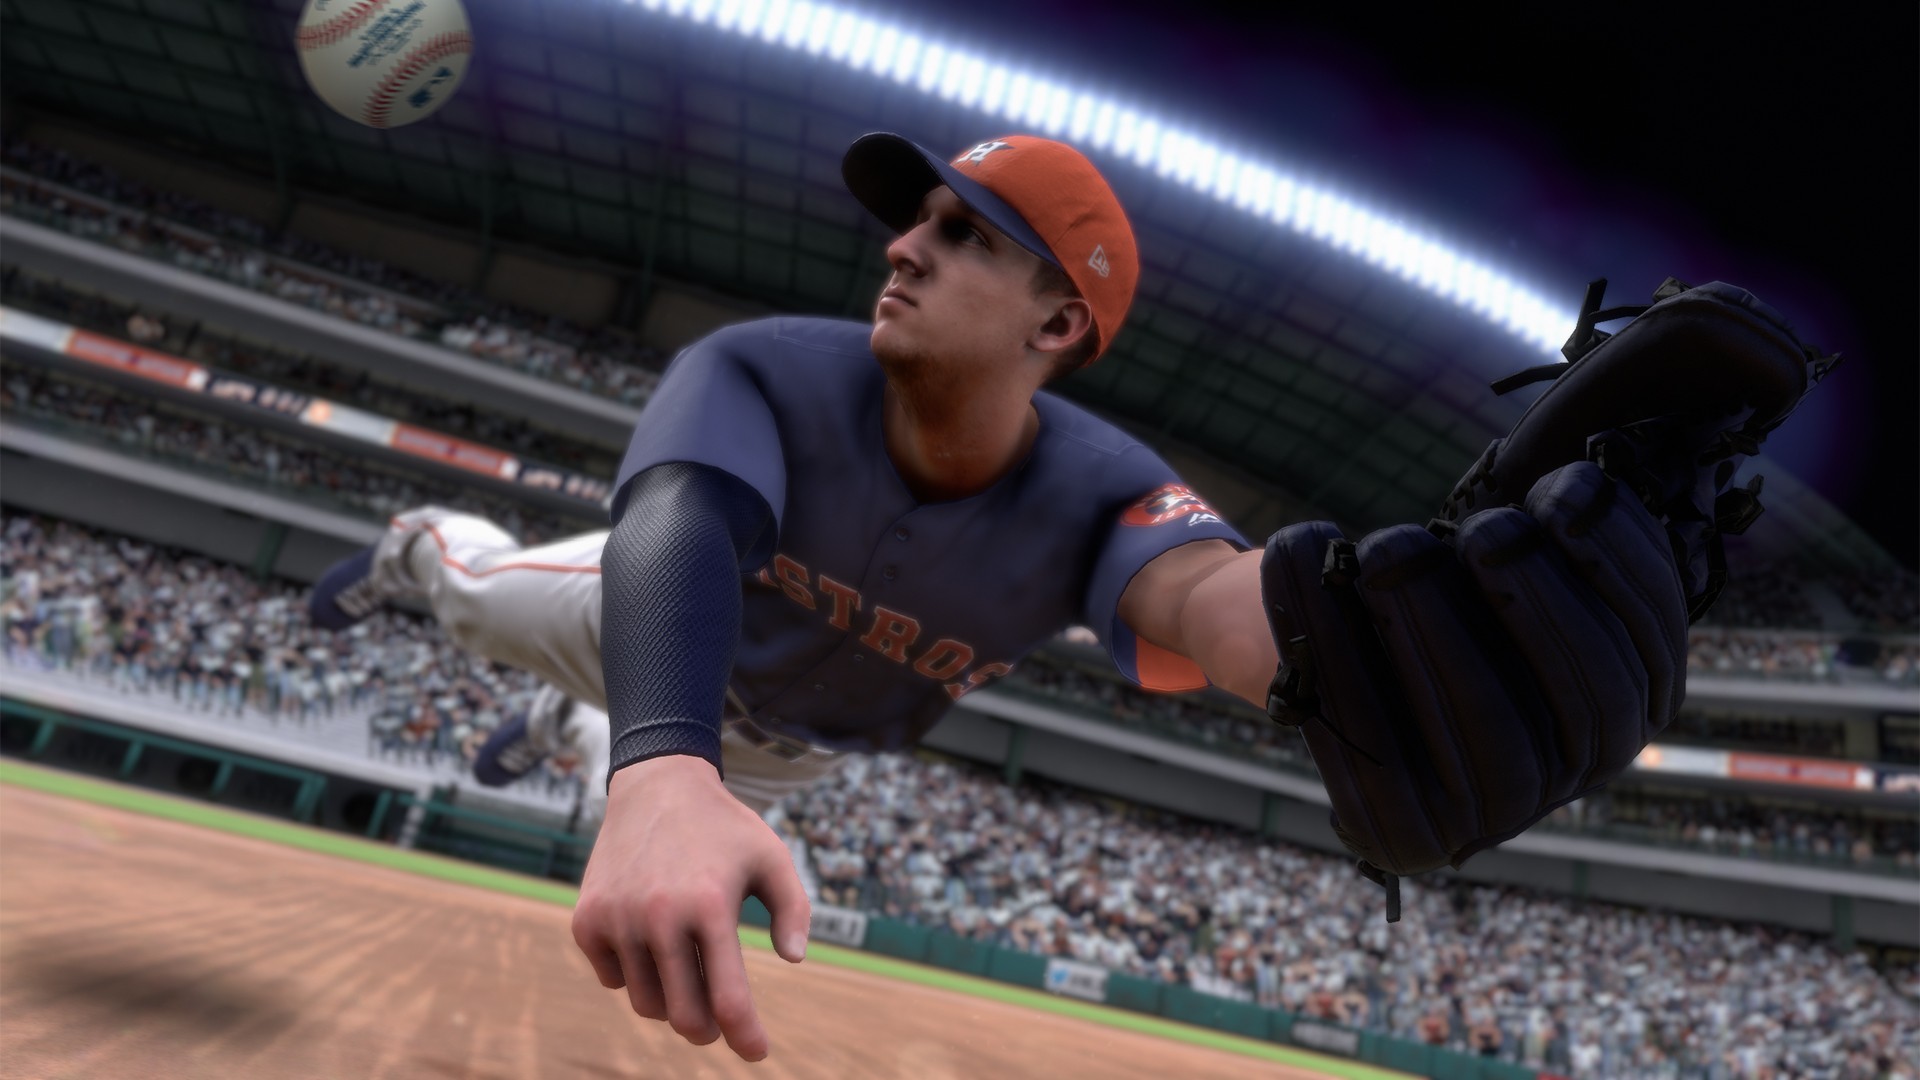 R B I Baseball 19 Is Available Now On Xbox One Xbox Wire